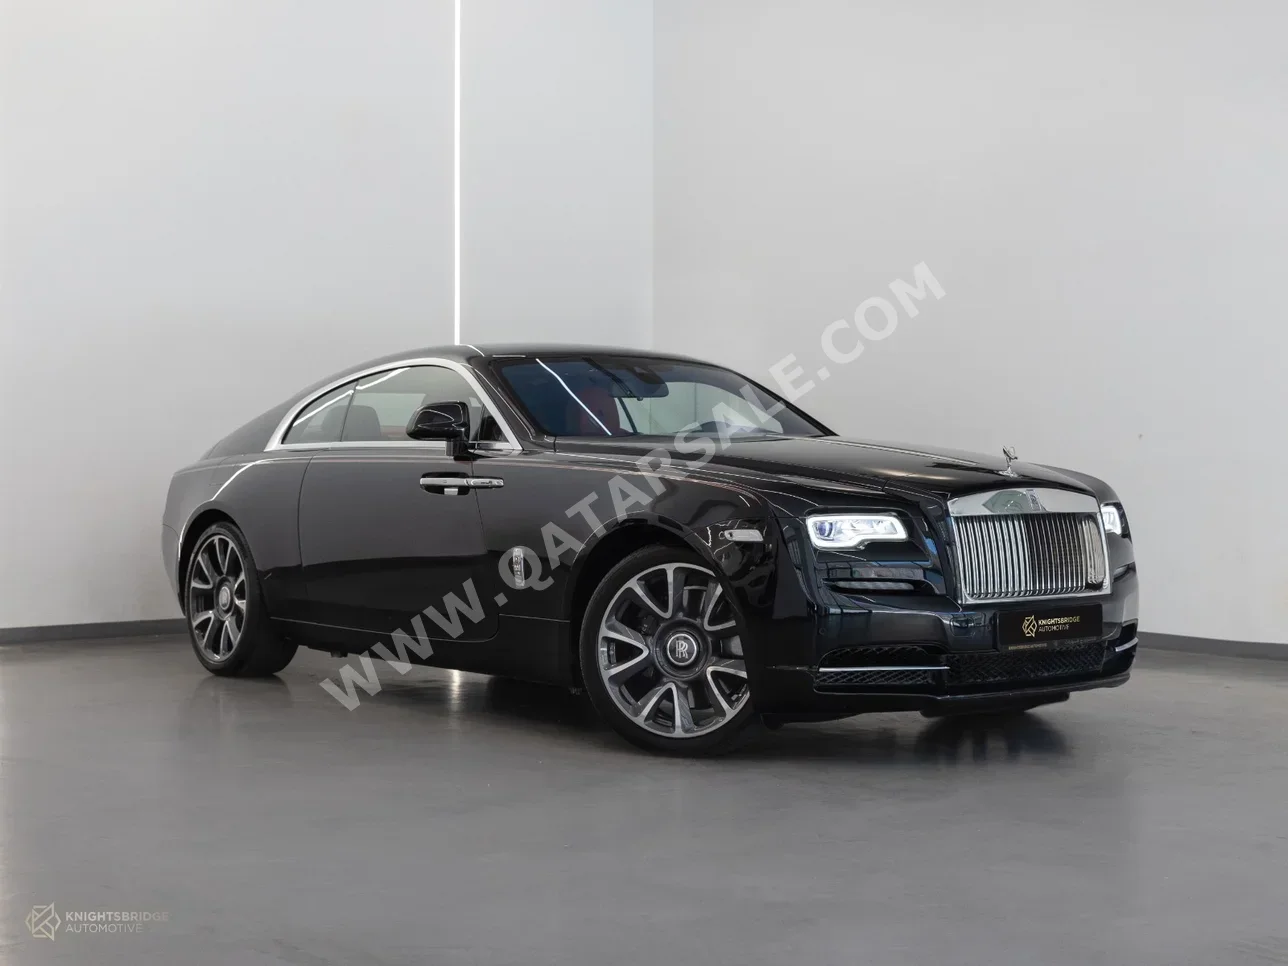 Rolls-Royce  Wraith  2017  Automatic  35,300 Km  12 Cylinder  All Wheel Drive (AWD)  Coupe / Sport  Black